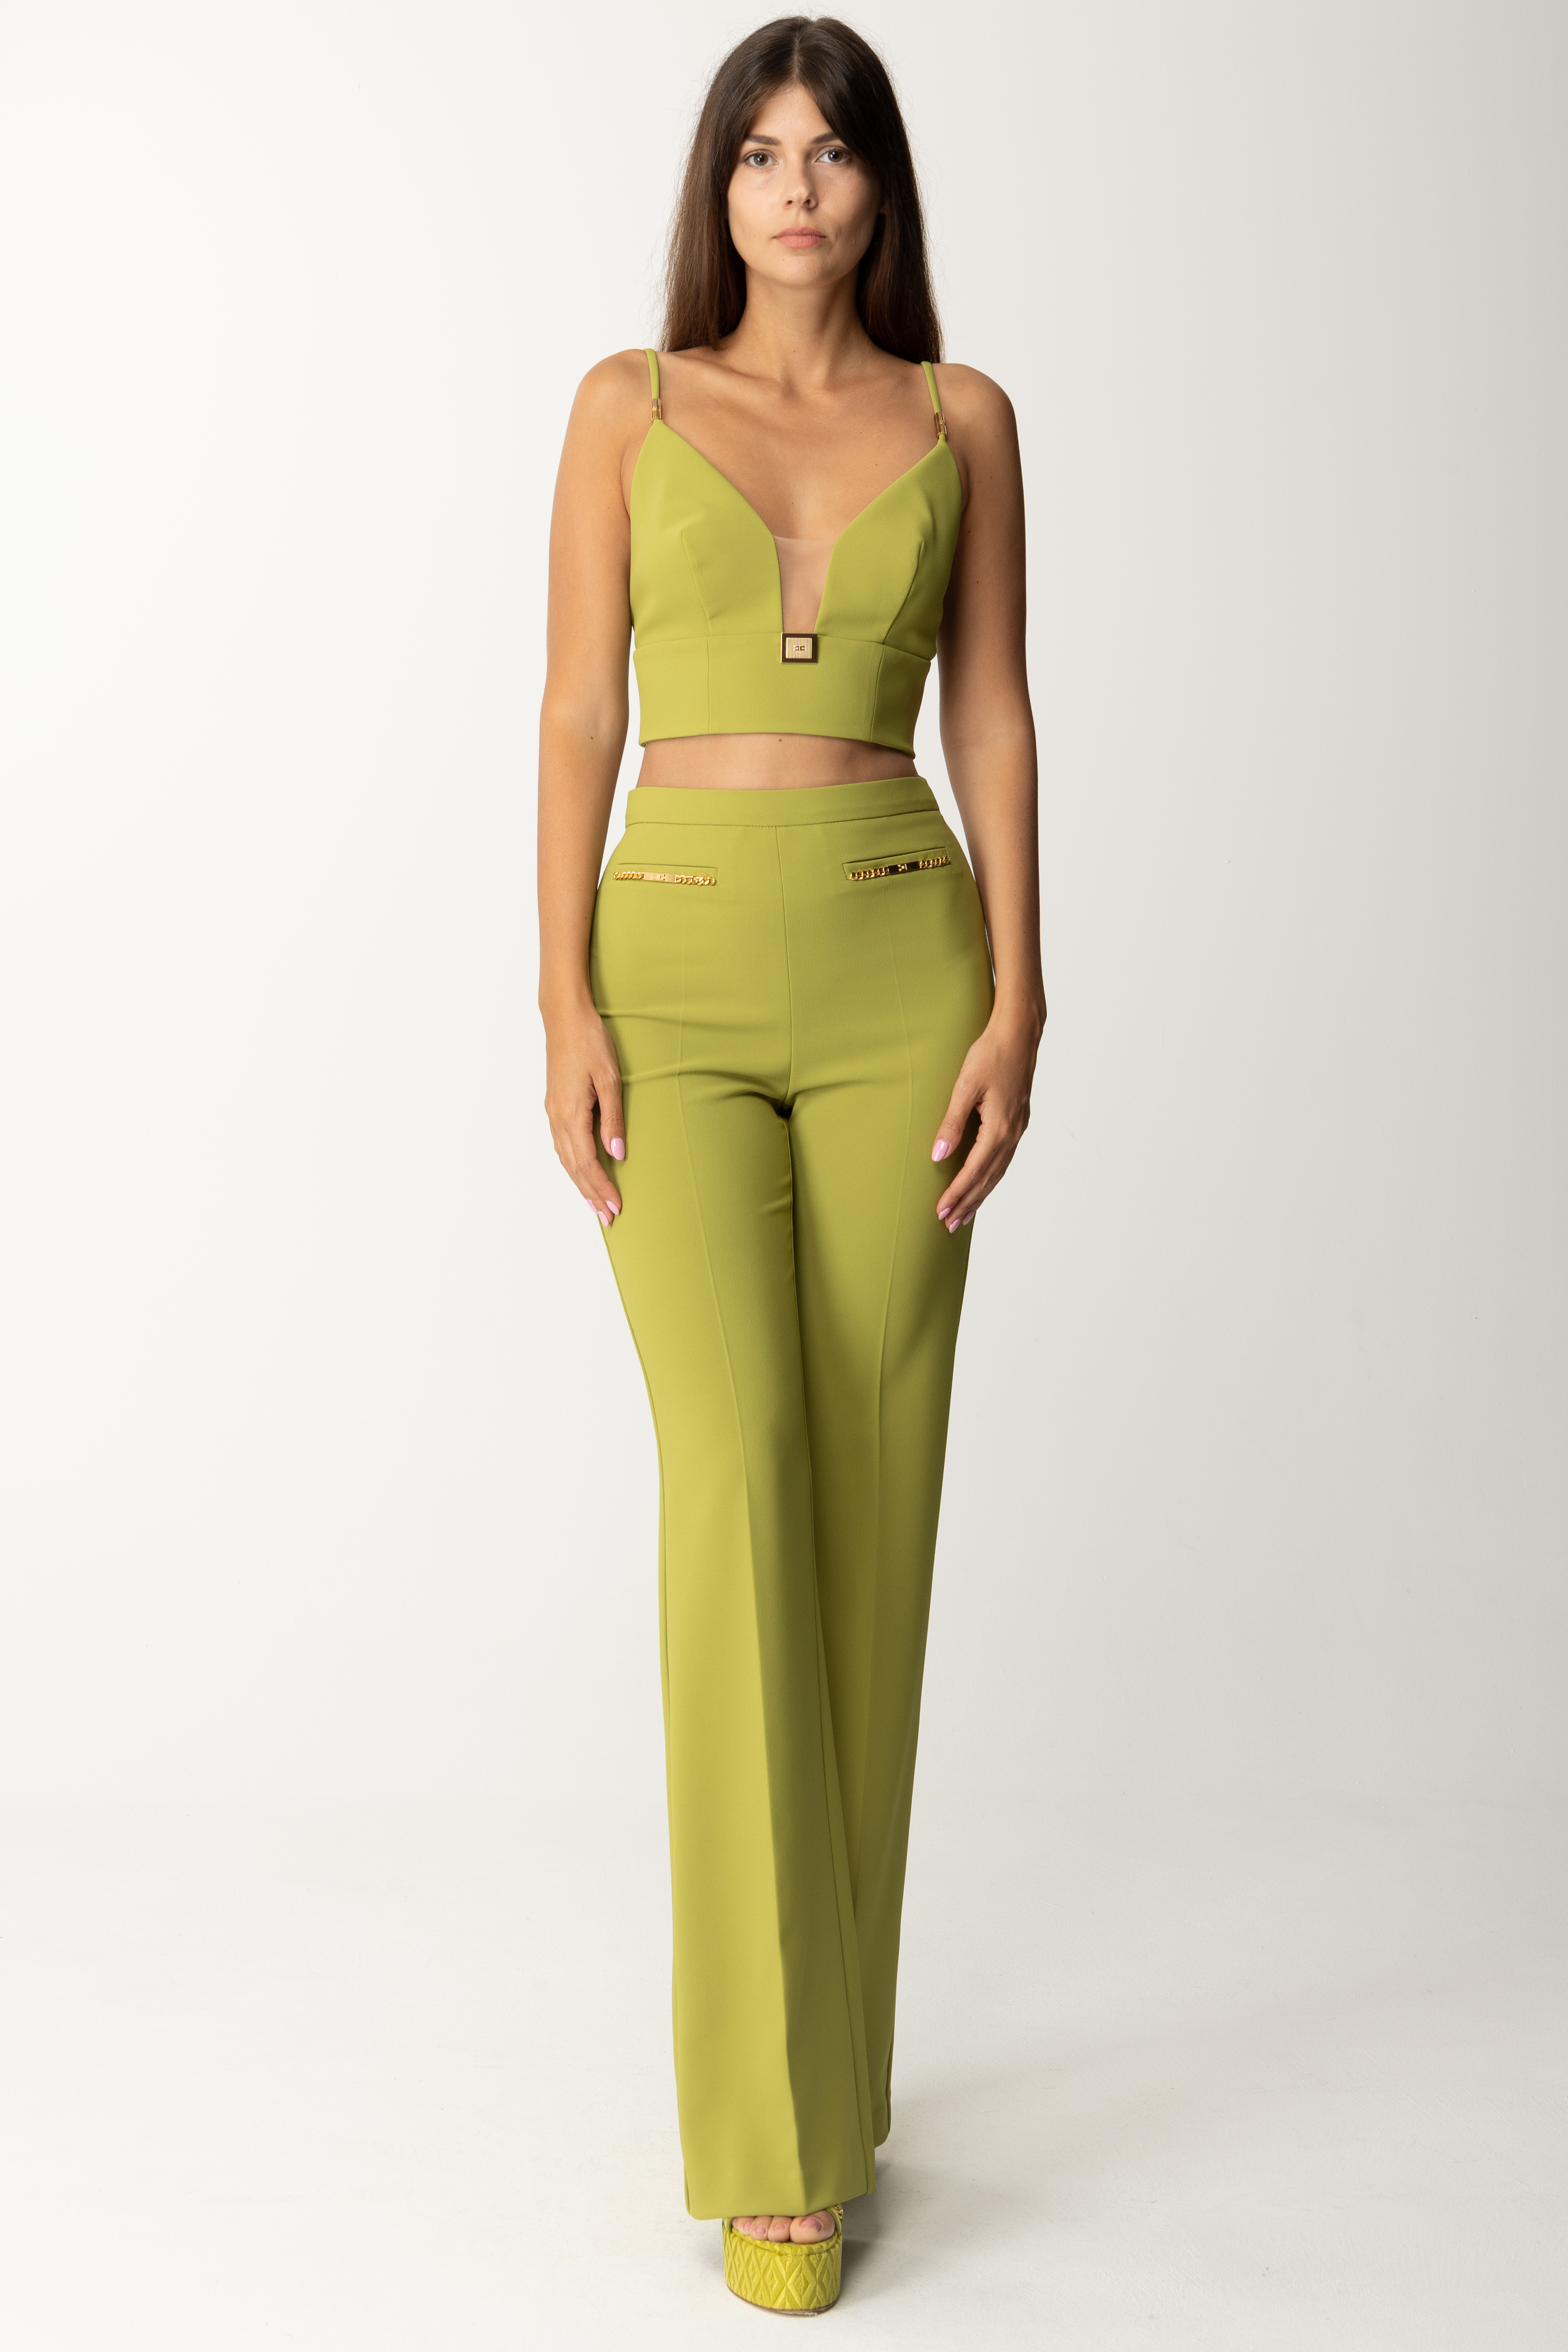 Preview: Elisabetta Franchi Top with cups and thin straps with metal accessories OLIVE OIL